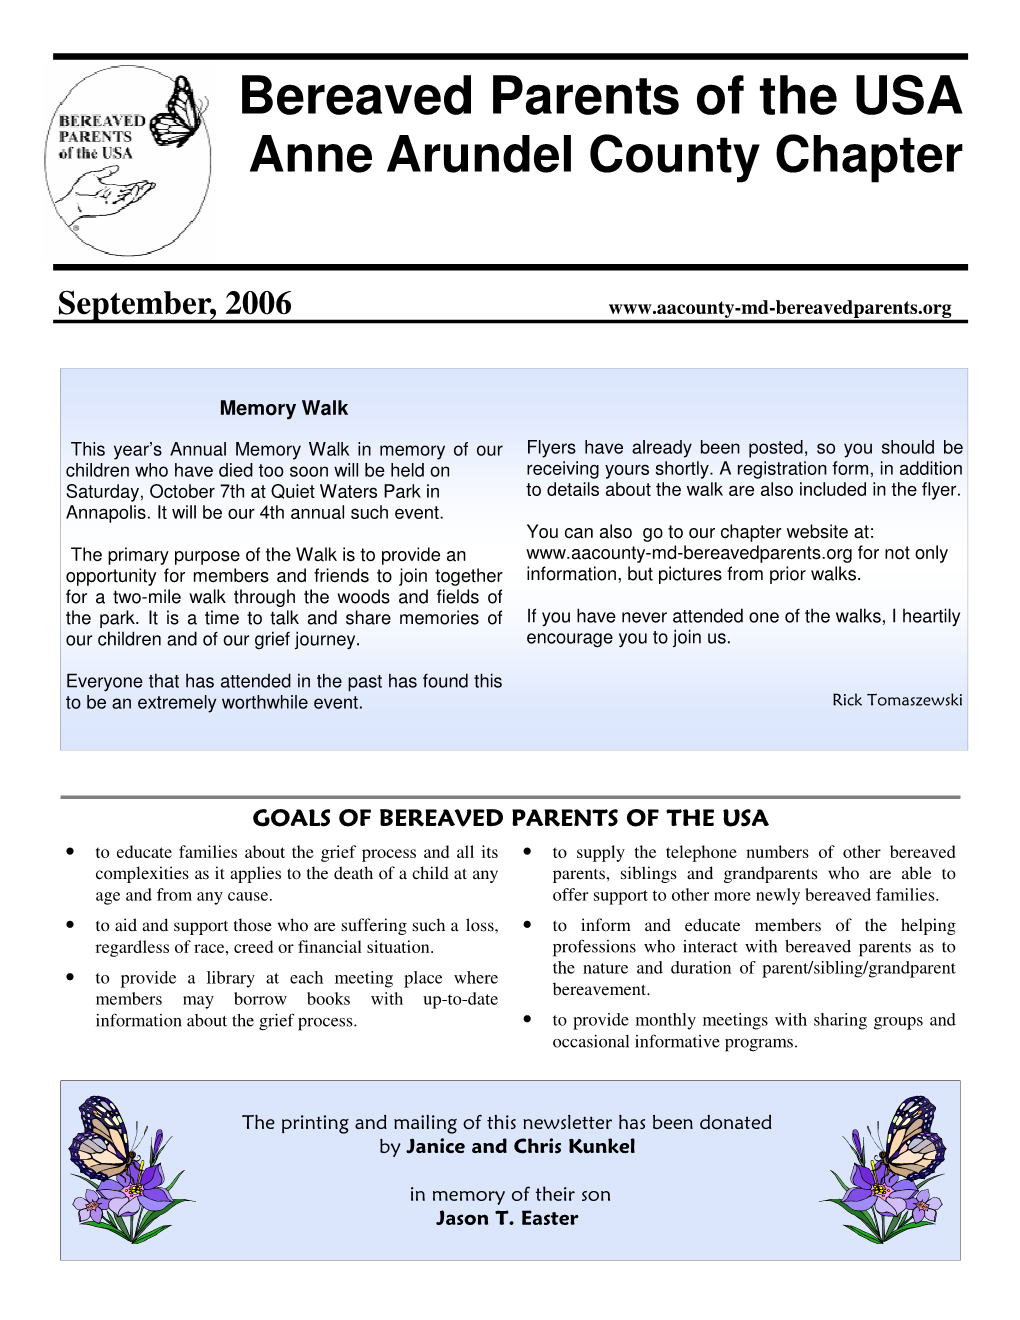 Bereaved Parents of the USA, Anne Arundel County, Annapolis, MD